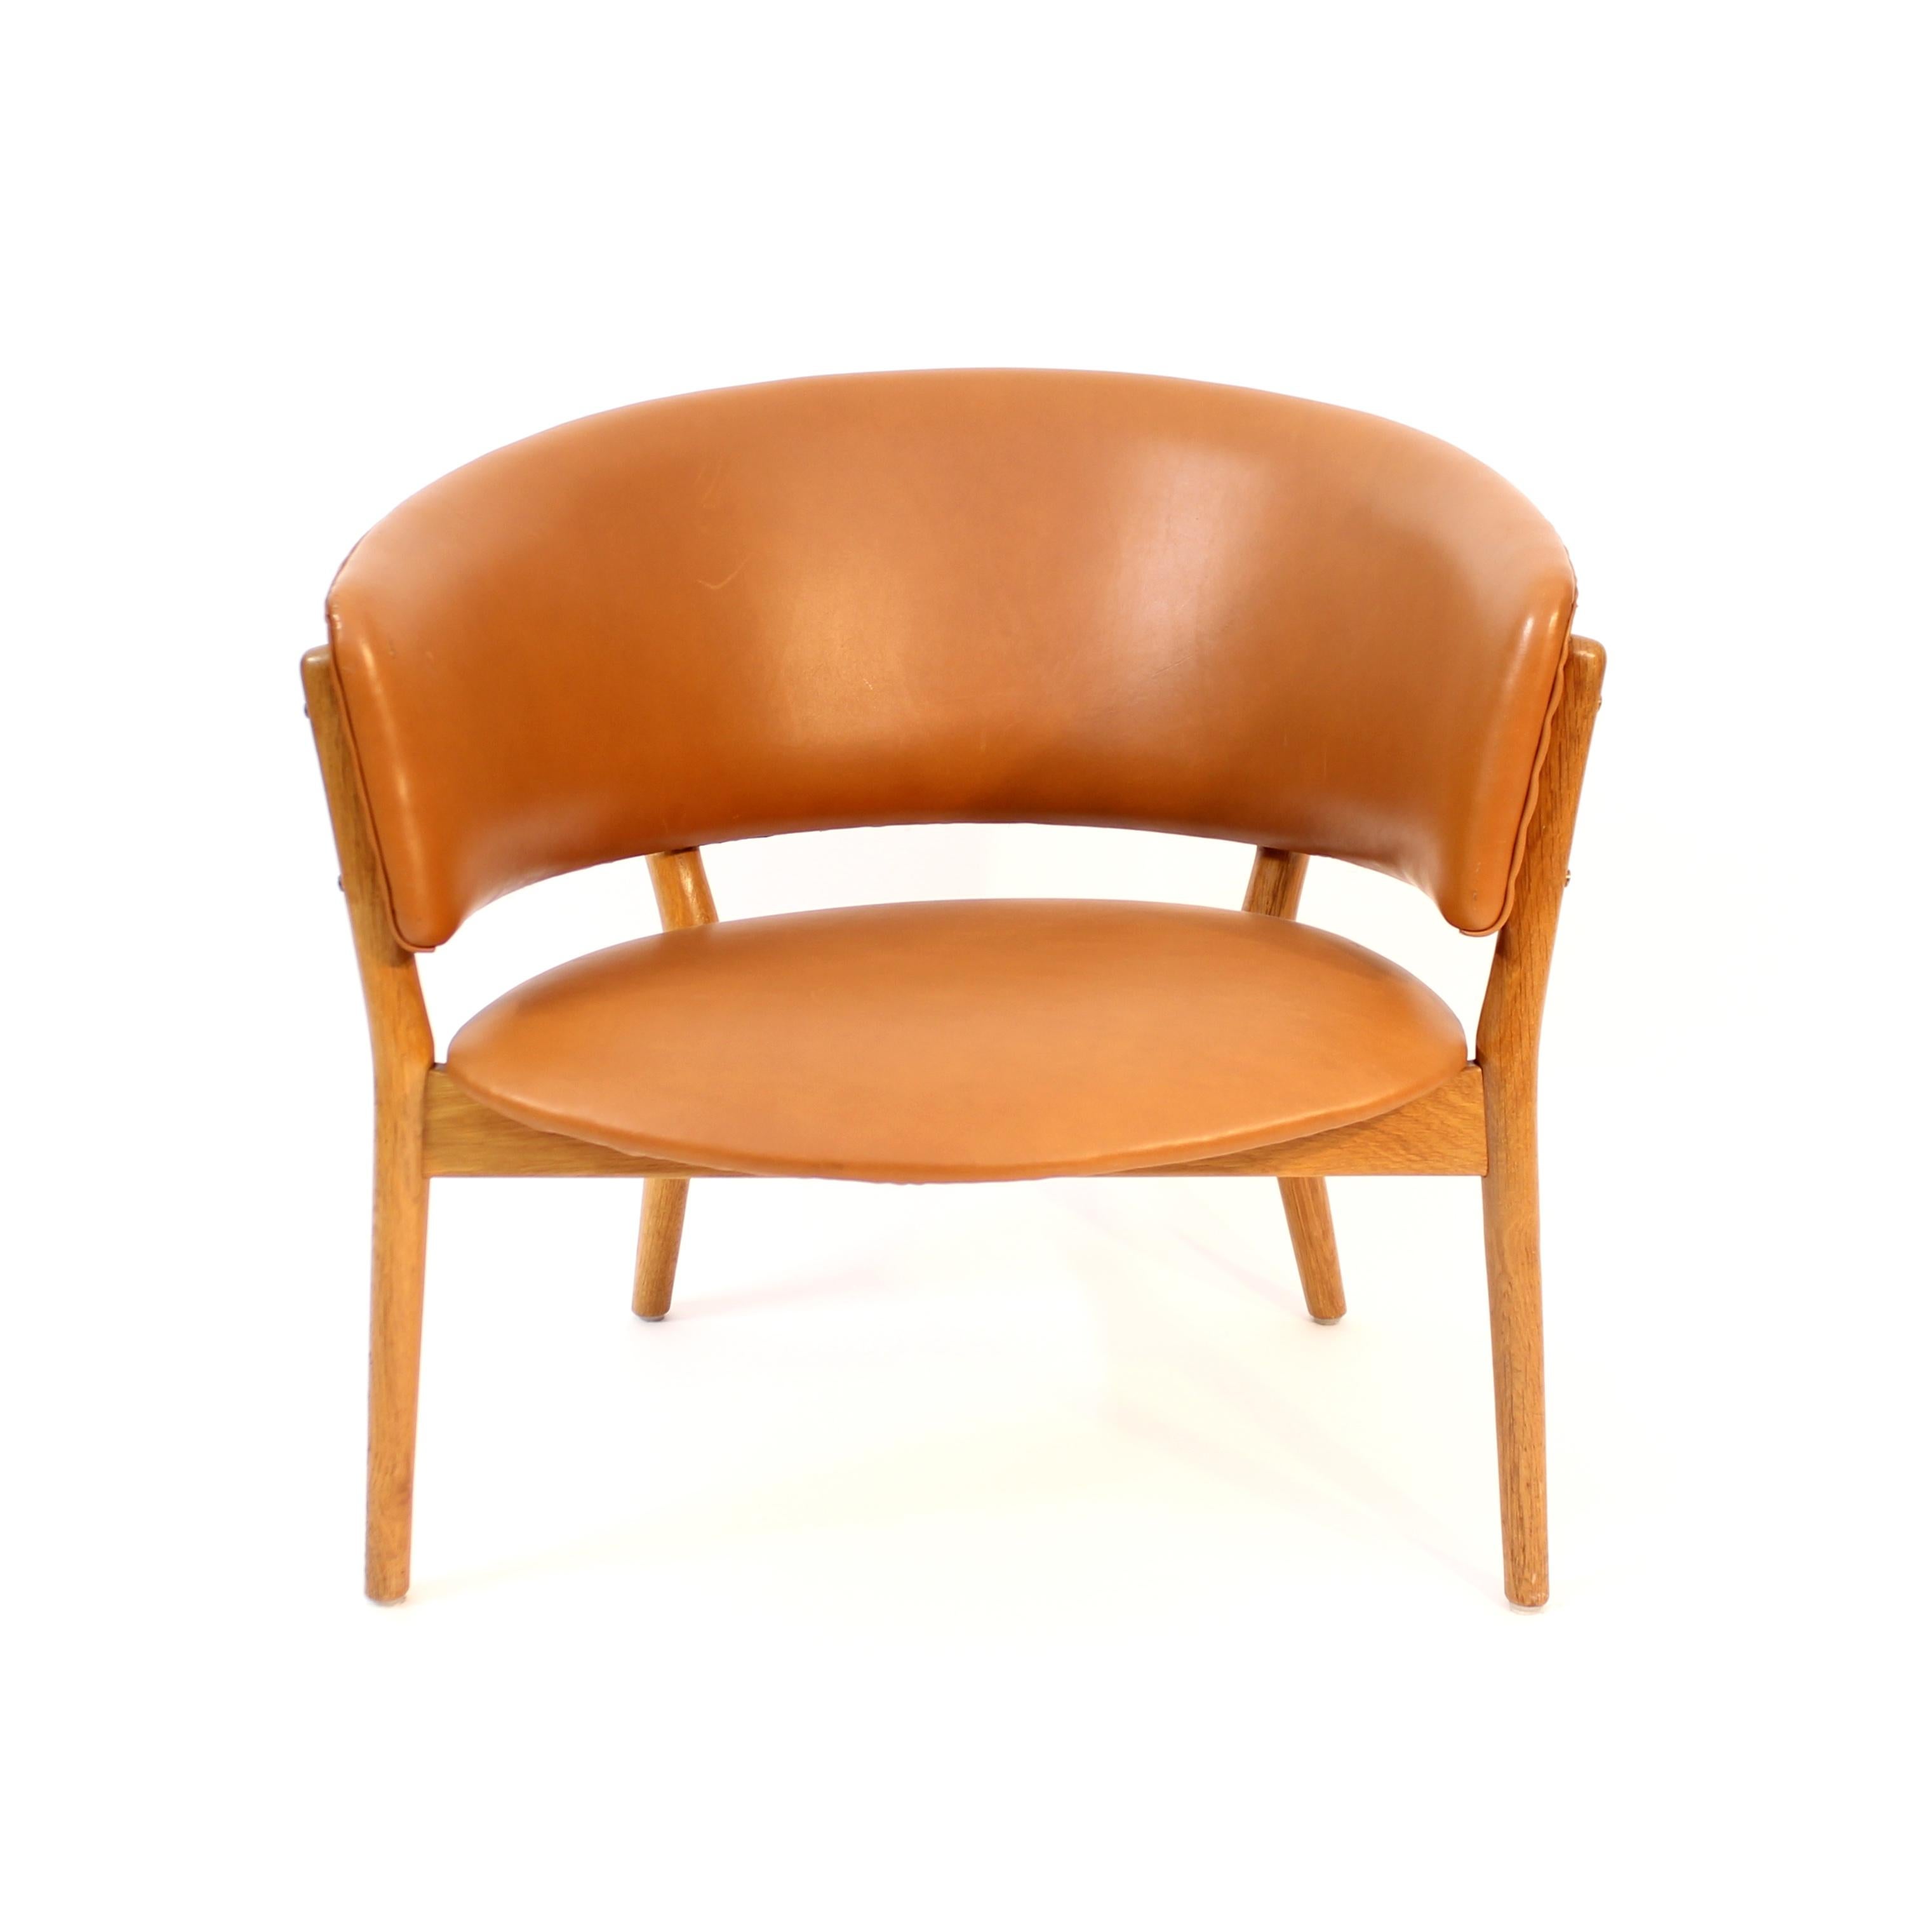 Nanna Ditzel lounge chair and true Danish design classic, the ND 83 or 